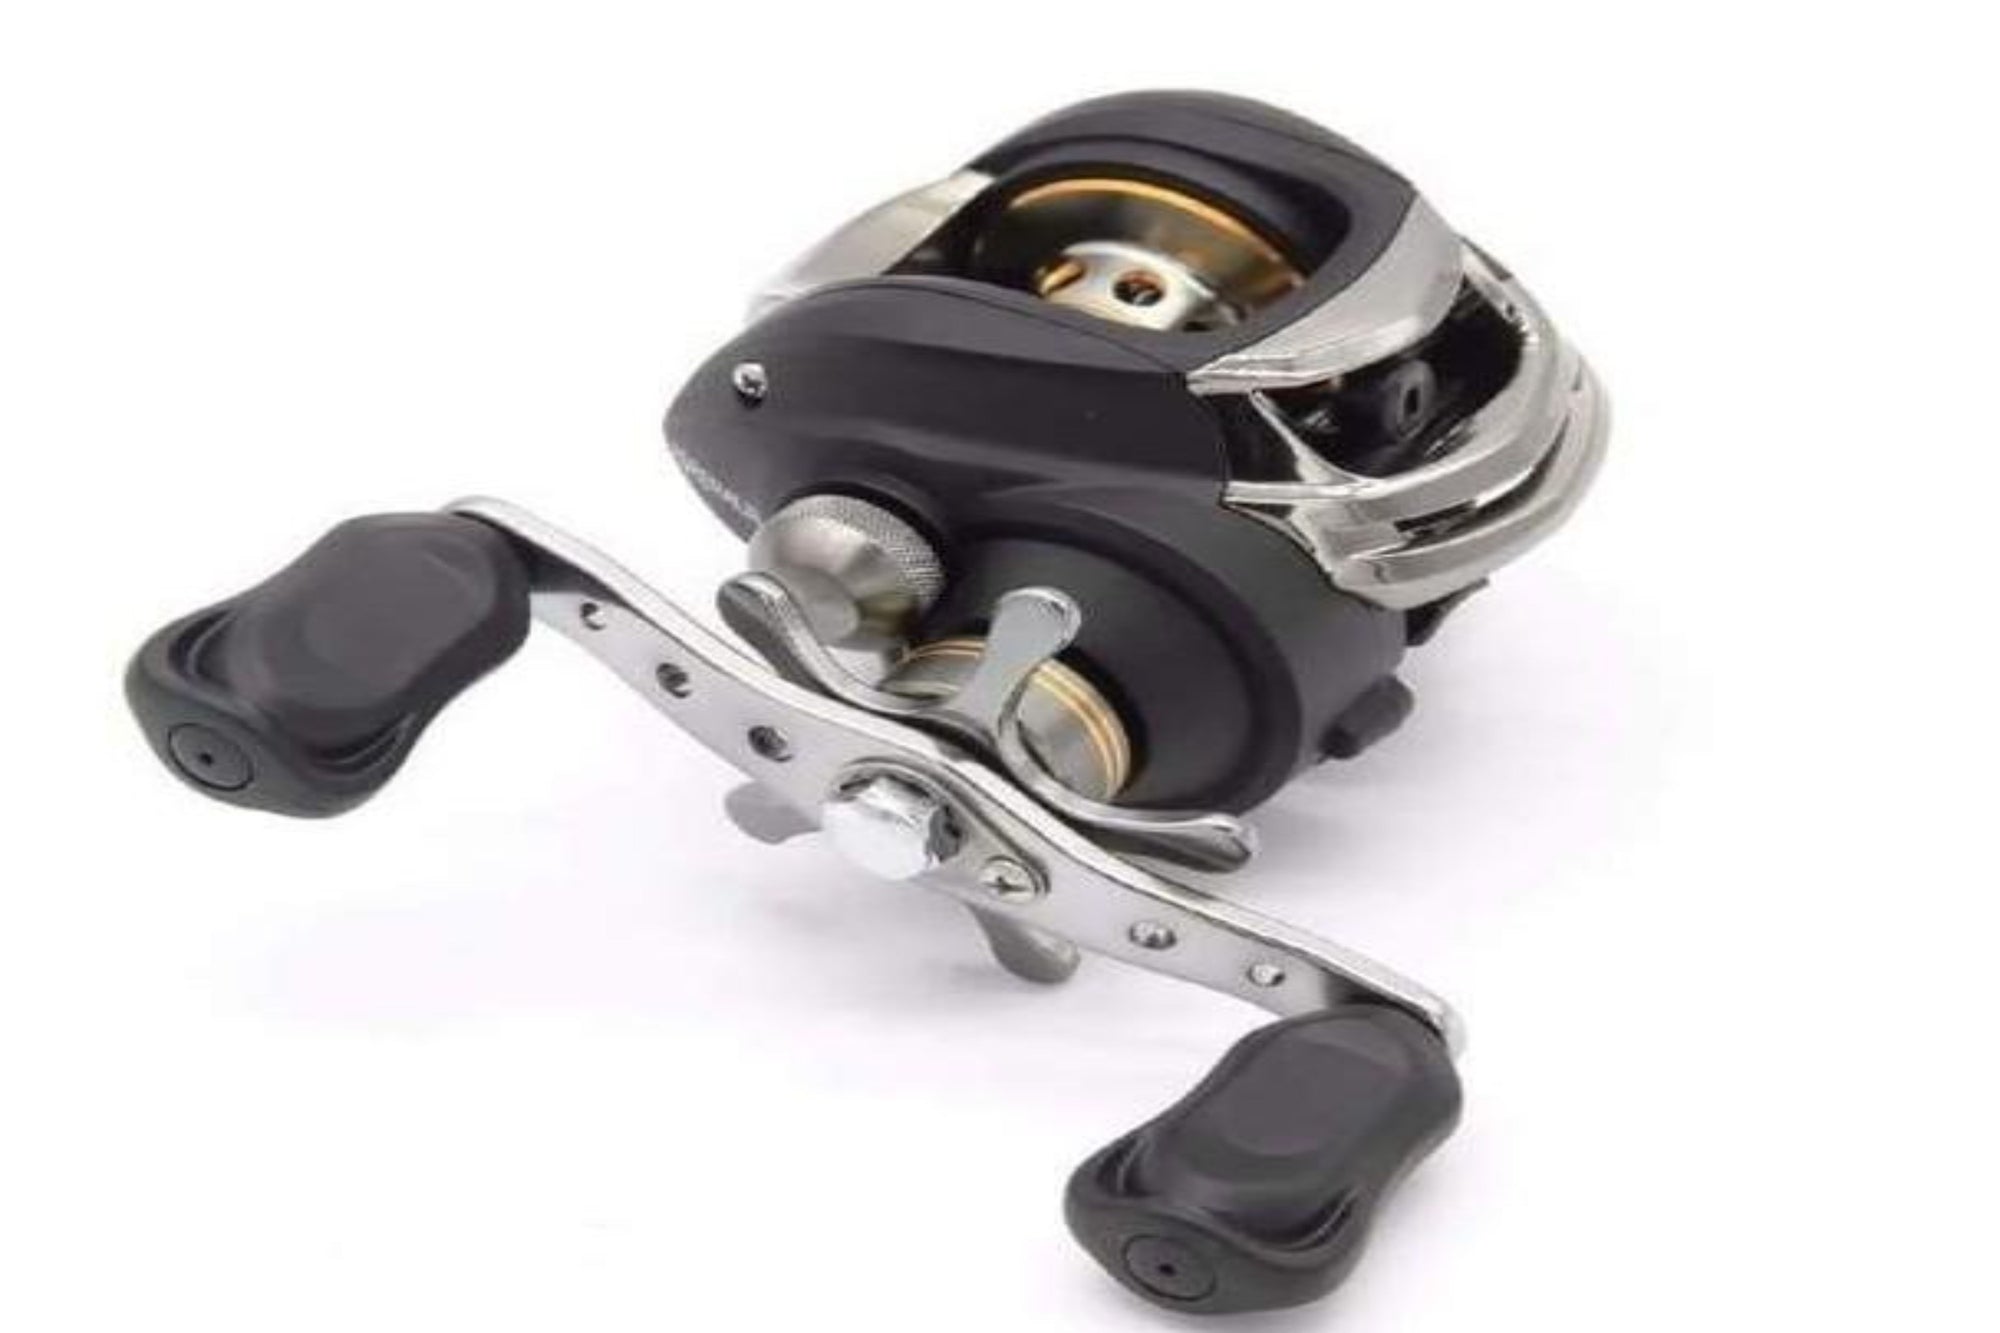 Adrenalin ADR 103 Bait Casting Reel - The Fishing Specialist